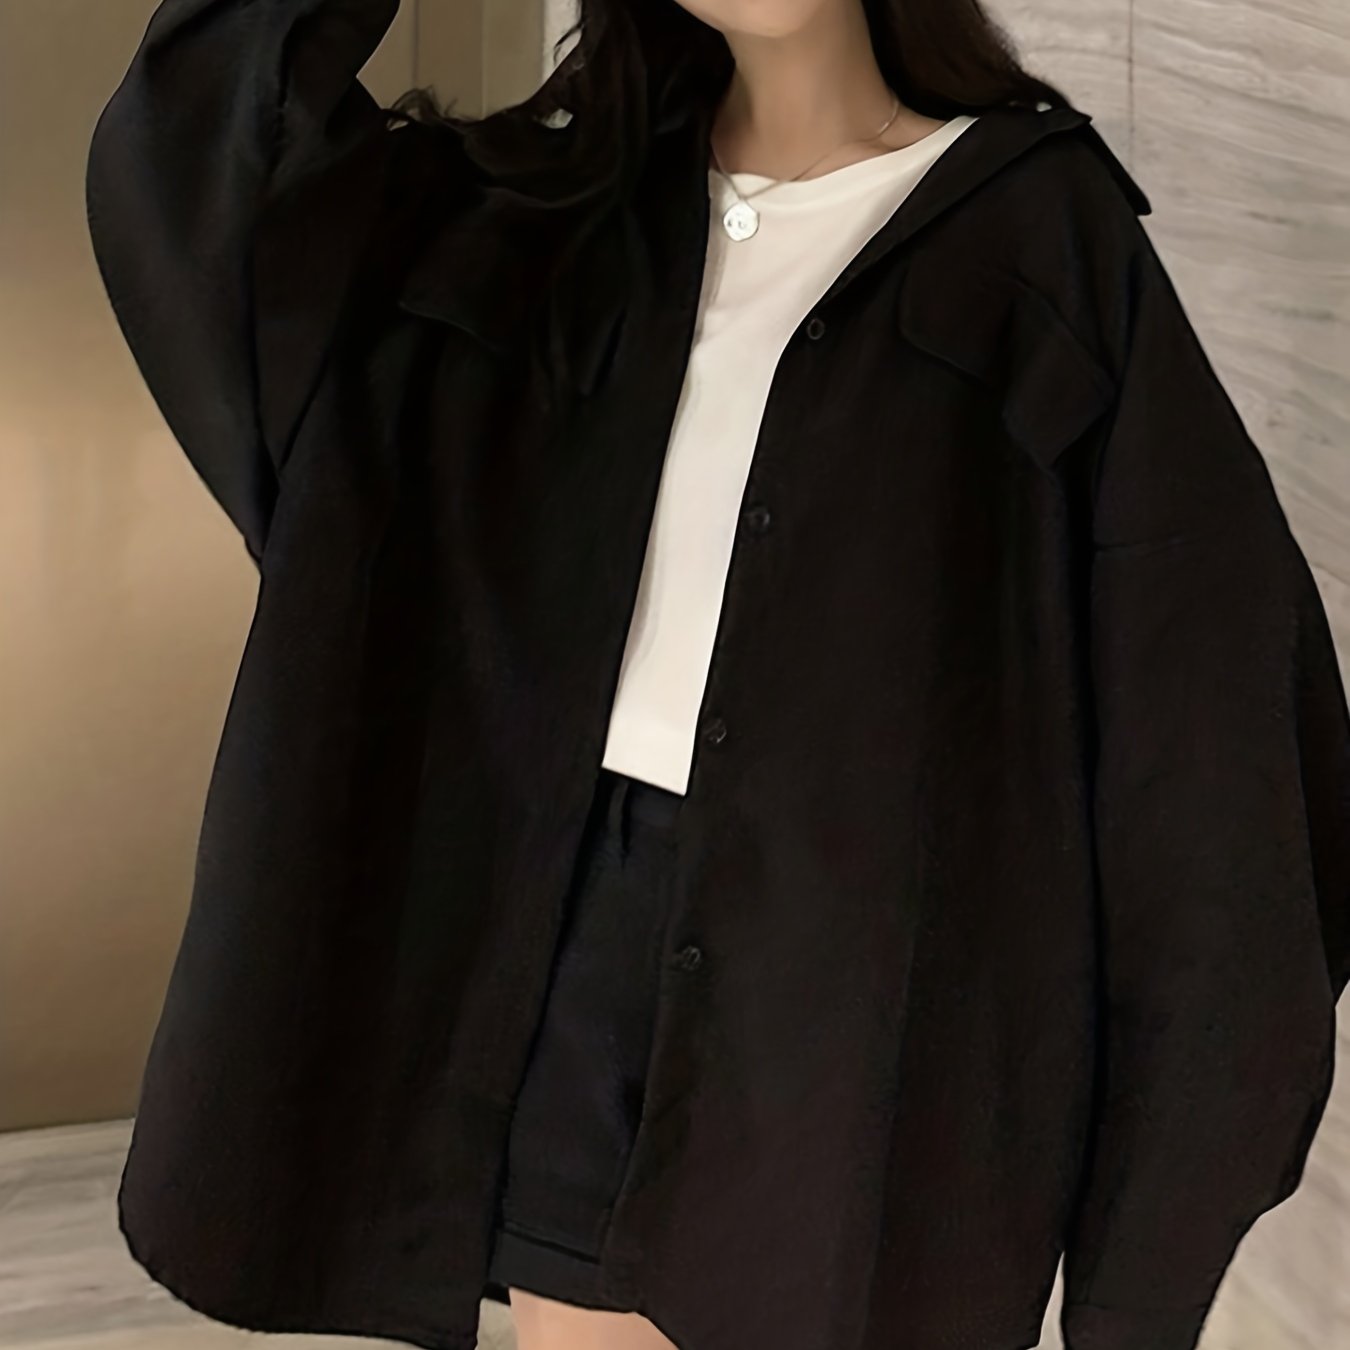 Antmvs Solid Oversized Shirt, Casual Button Front Long Sleeve Collared Shirt, Women's Clothing